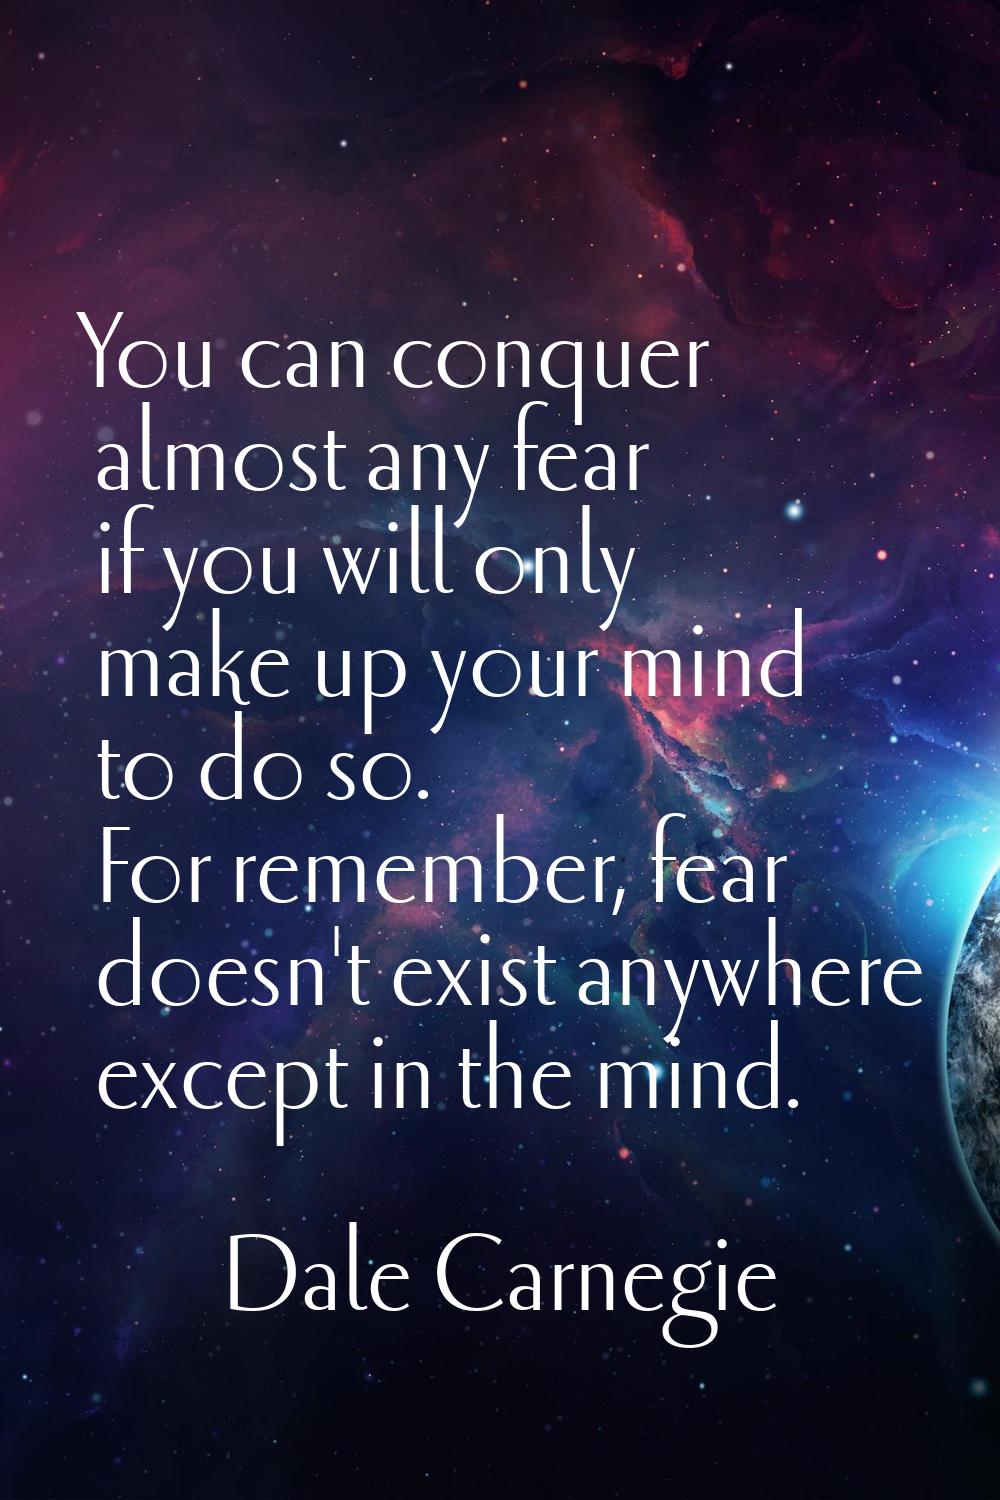 You can conquer almost any fear if you will only make up your mind to do so. For remember, fear doe